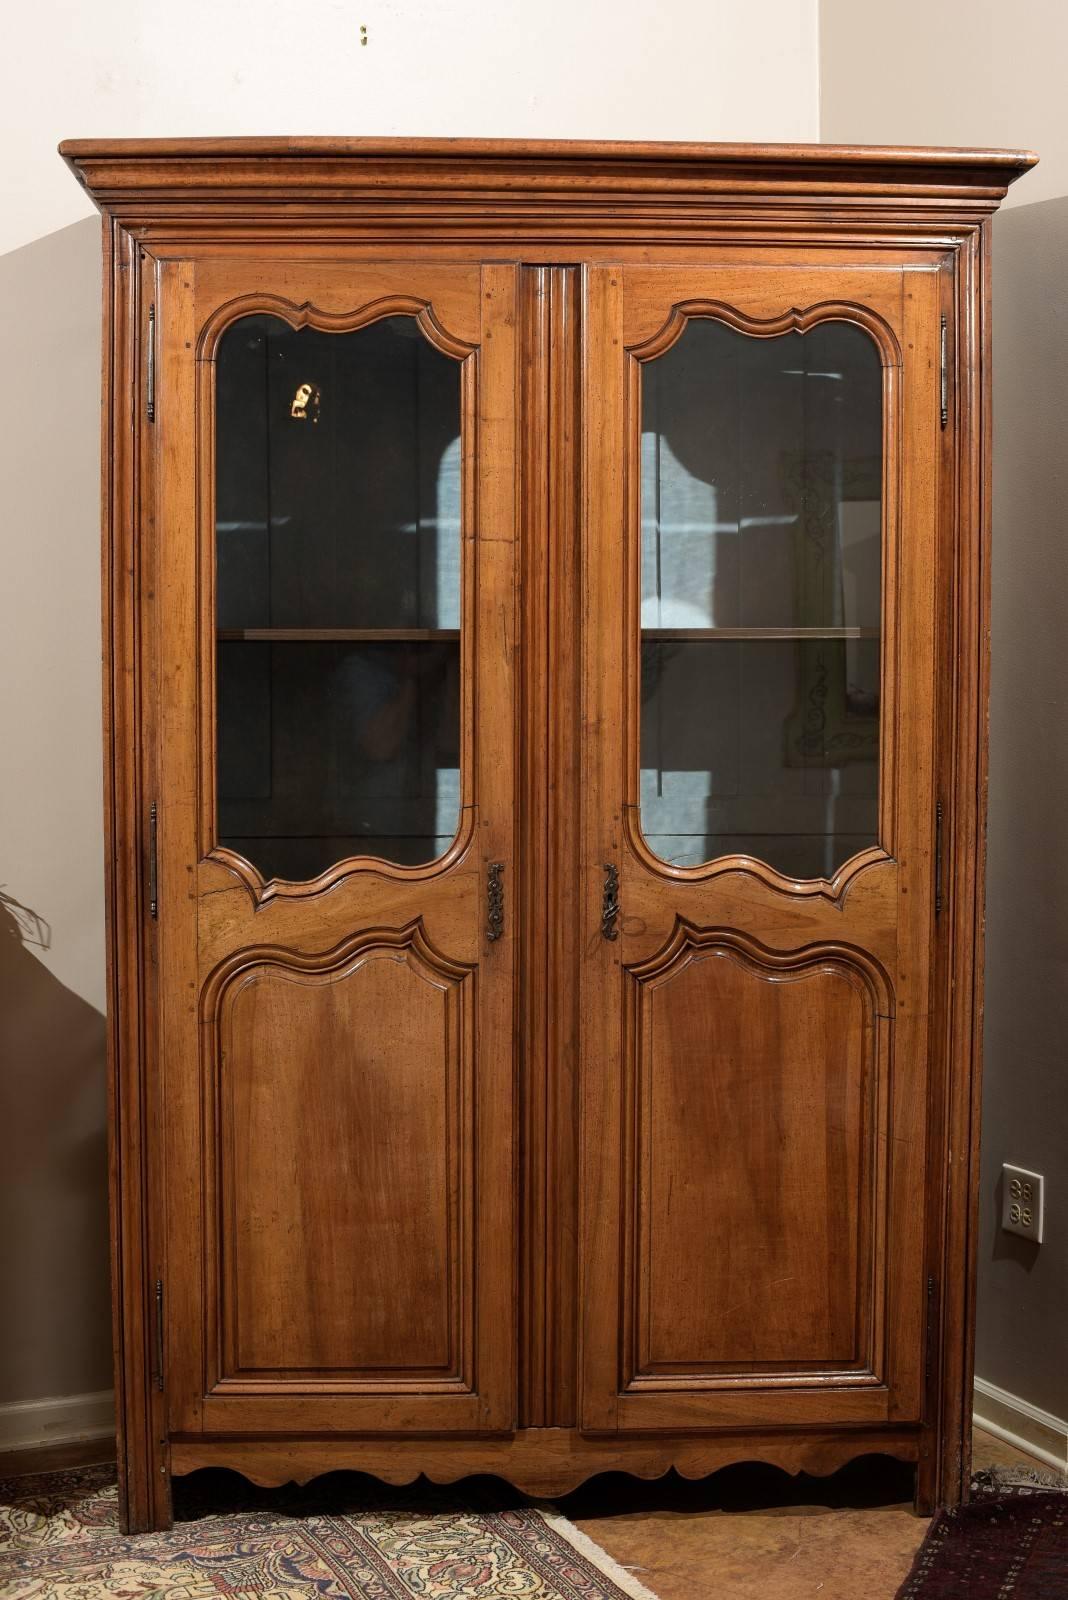 A tall antique Vitrine which is lovely for displaying items. There are two doors with the upper being glass. Two drawers are inside which possibly were added later.
The inside is painted a light blue and has brackets and shelving. Original locks